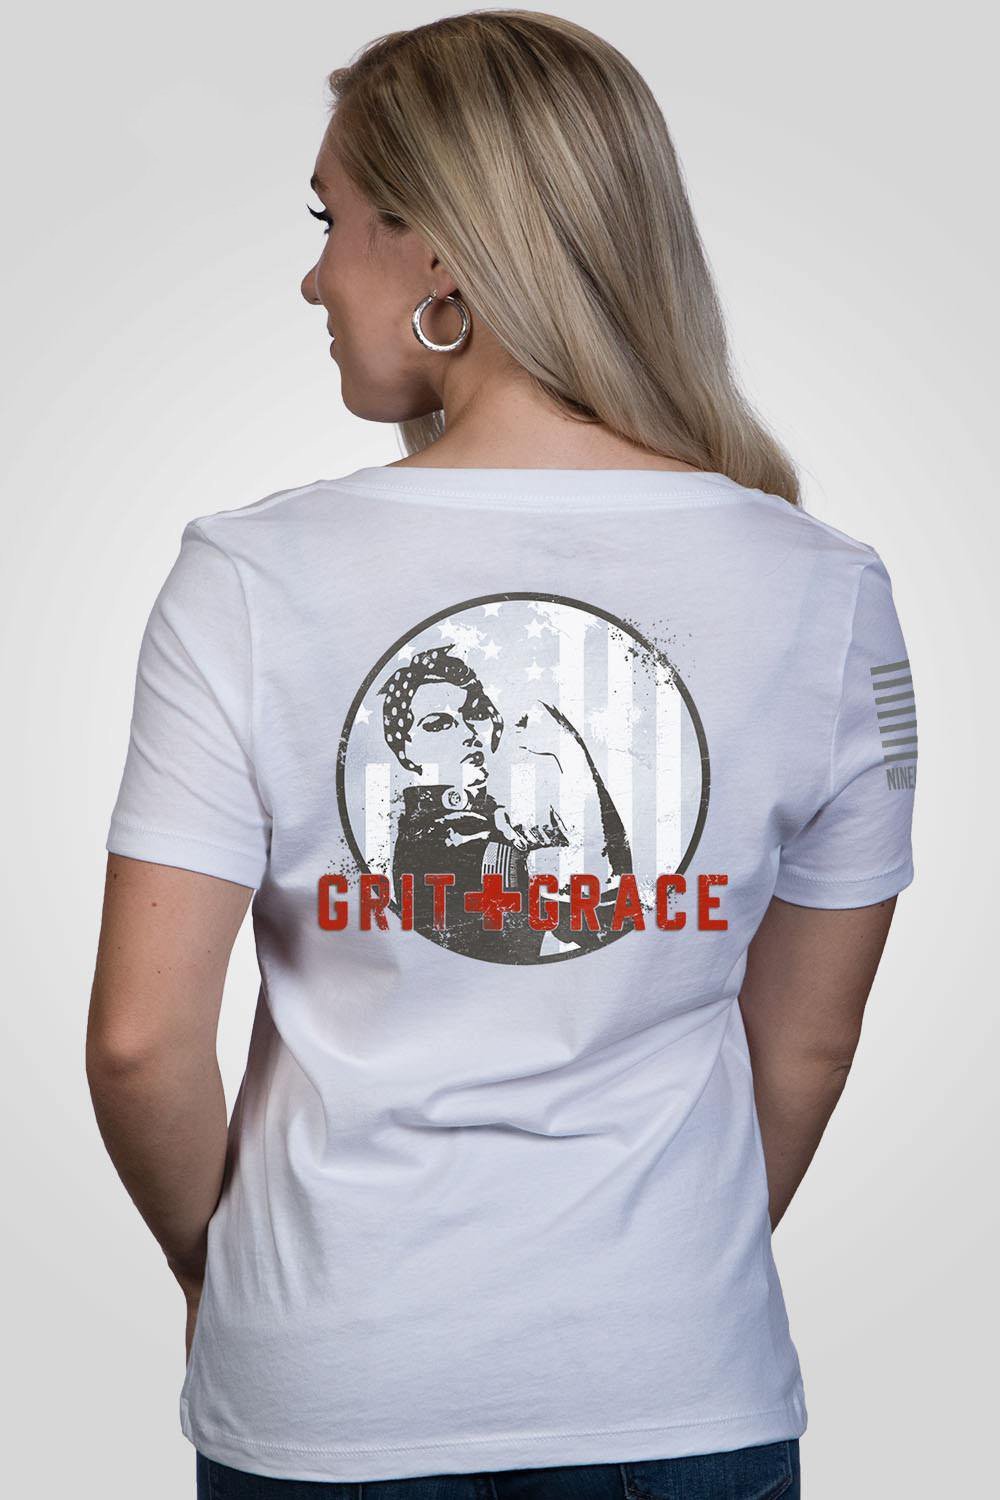 Women's Relaxed Fit V-Neck Shirt - Grit and Grace - Nine Line Apparel